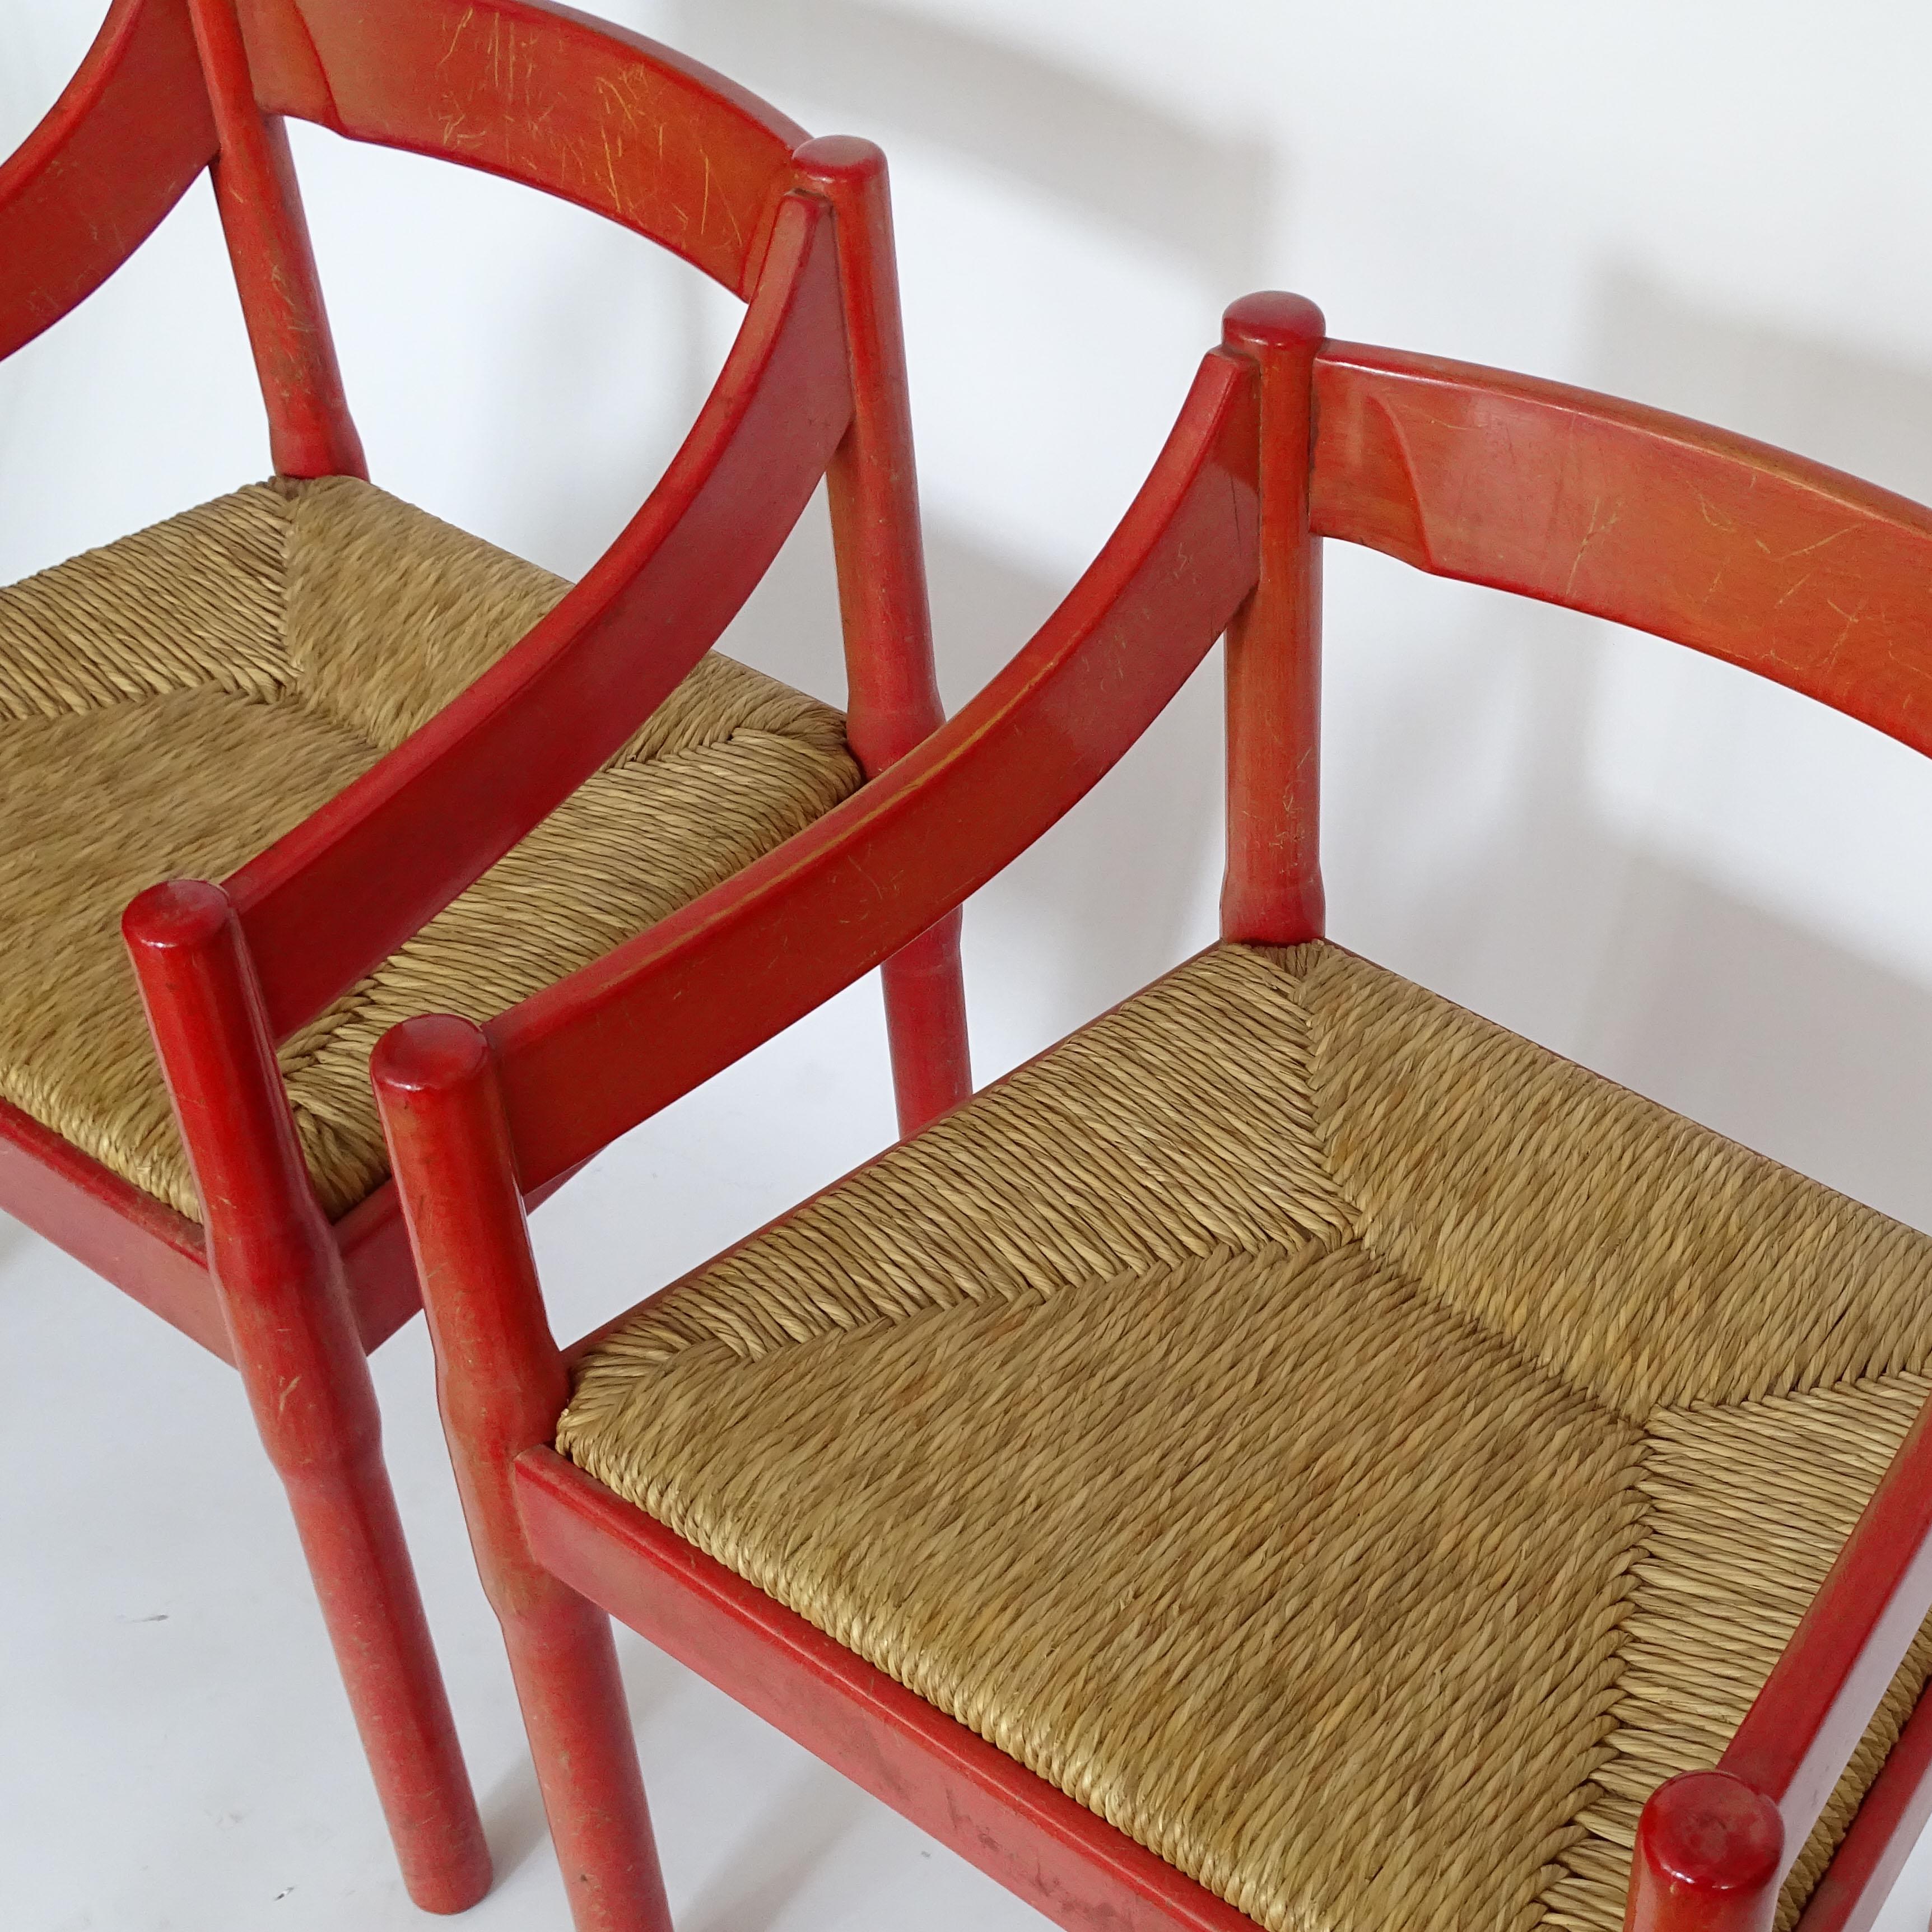 Vico Magistrett pair of red carimate armchairs for Cassina, Italy, 1961
Original red lacquer.
Original straw seats.